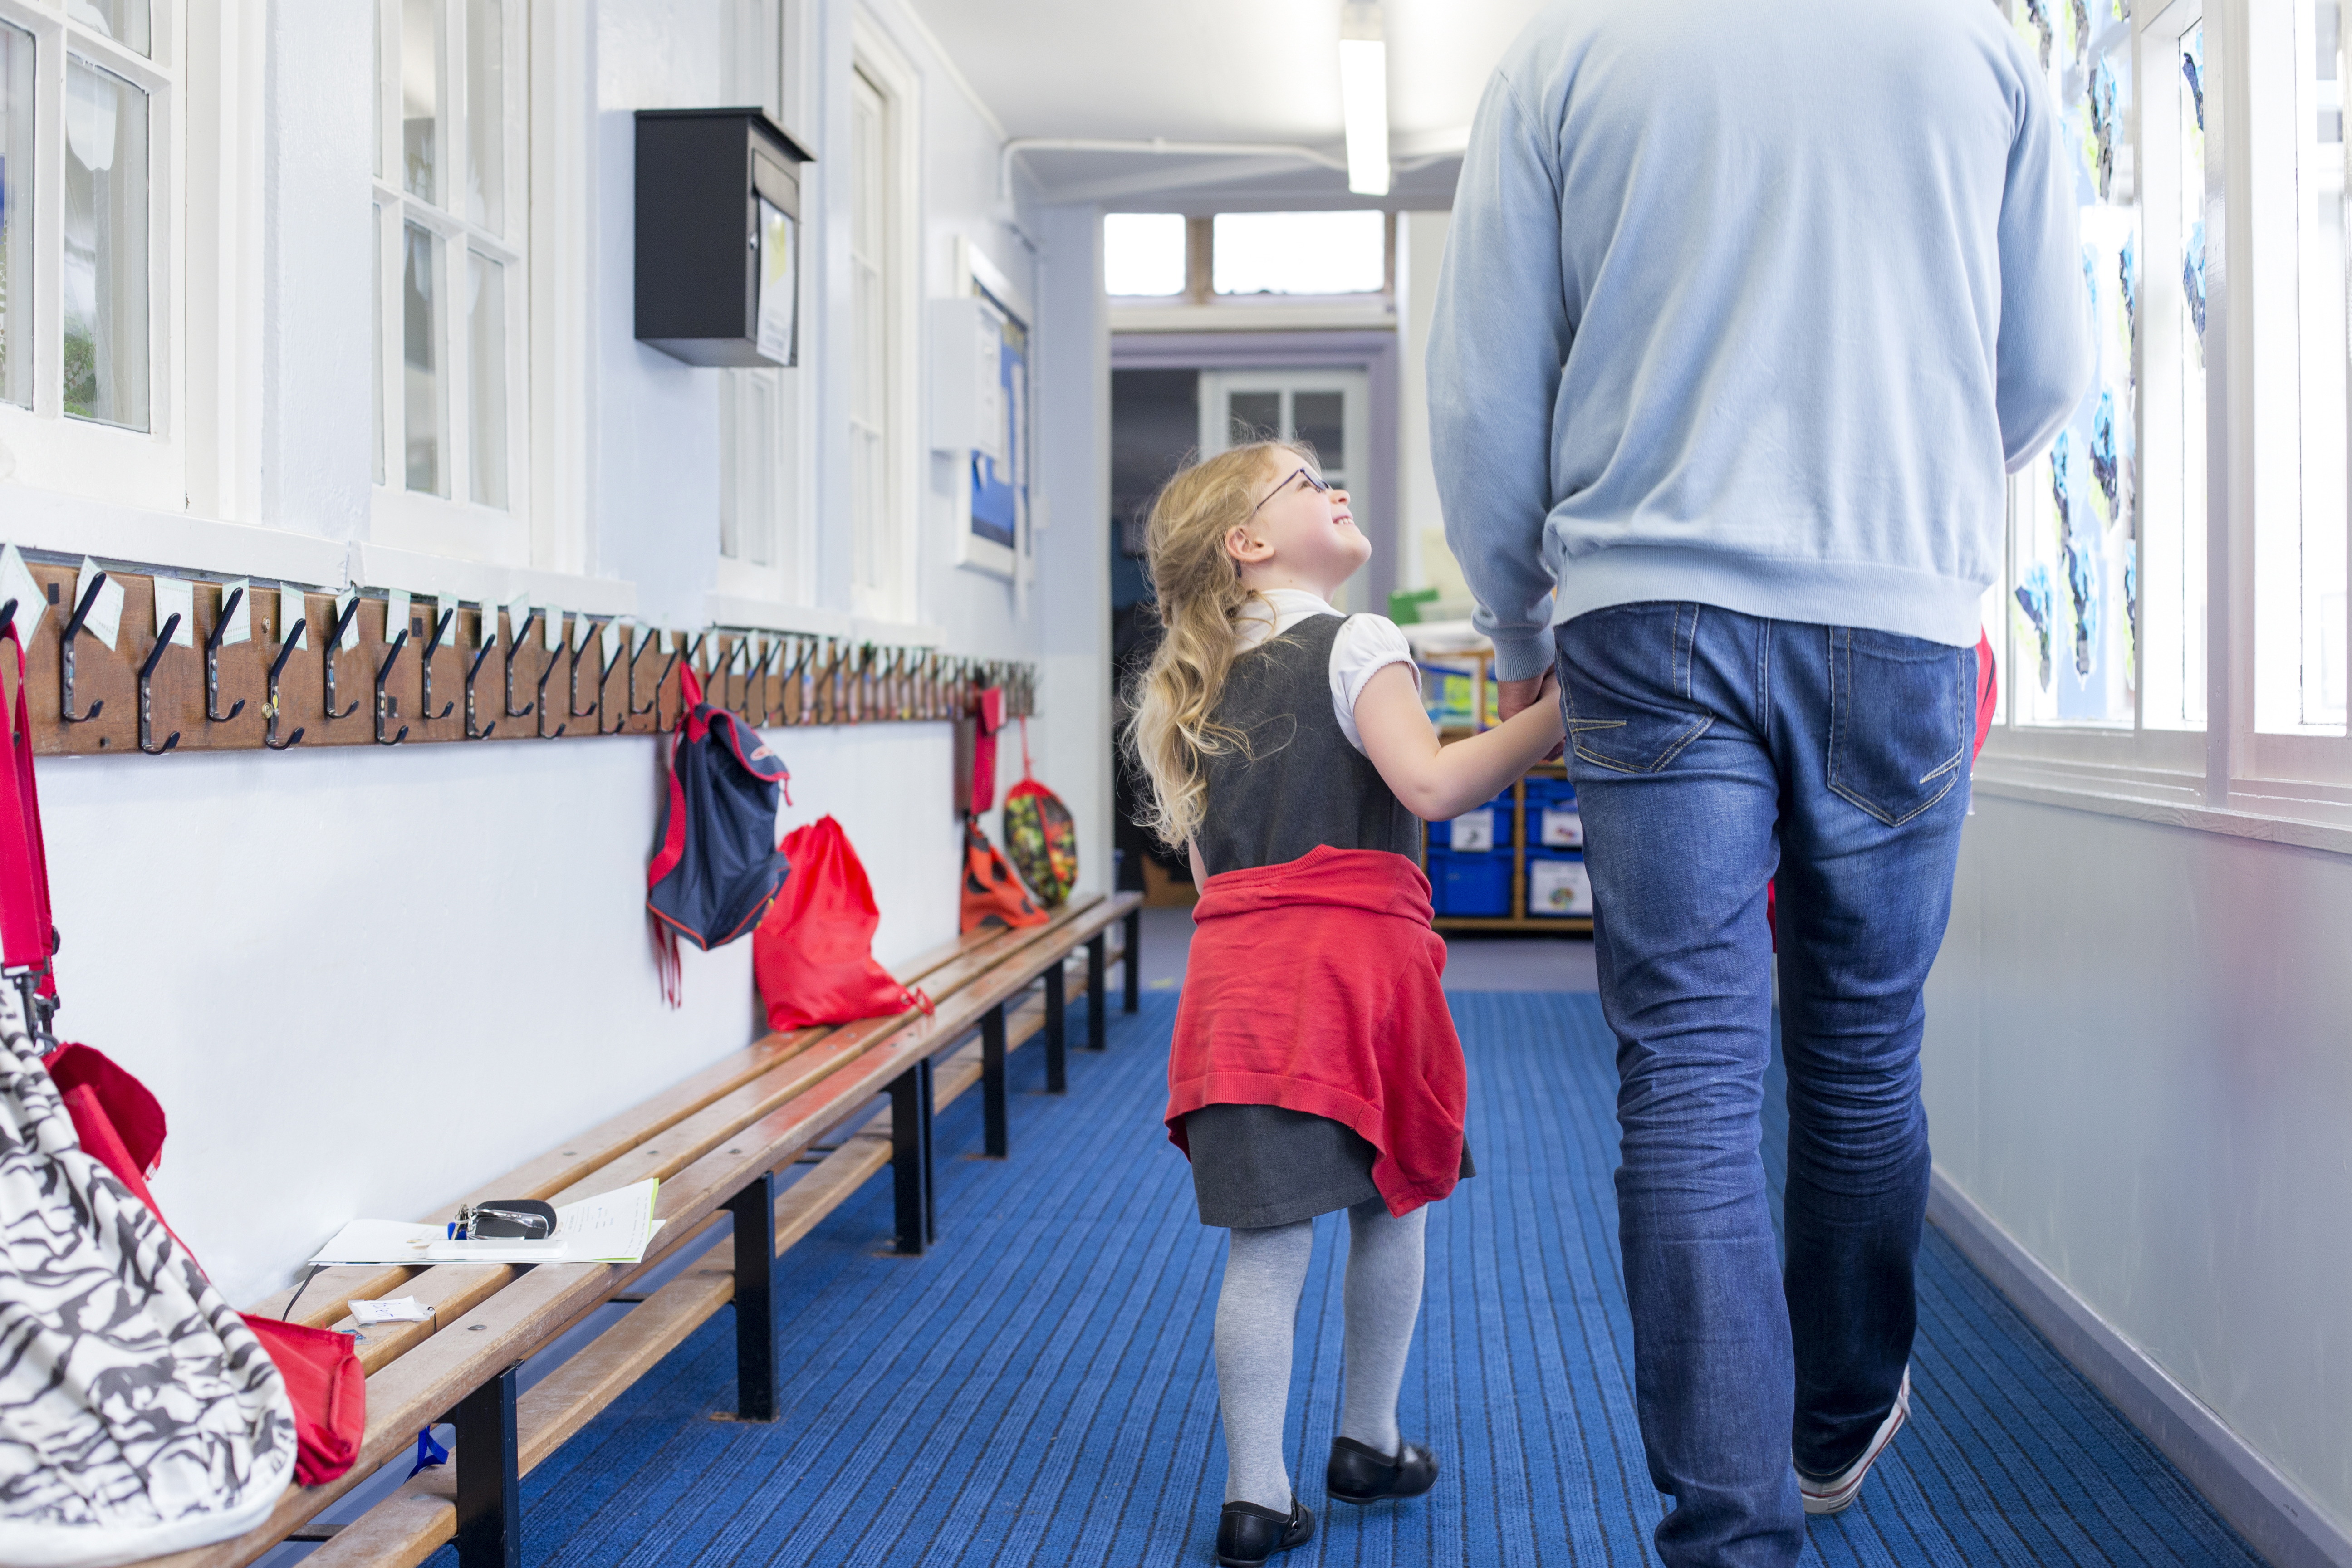 Little girl smiling and holding the hand of a man as they walk down a corridor | Source: Shutterstock